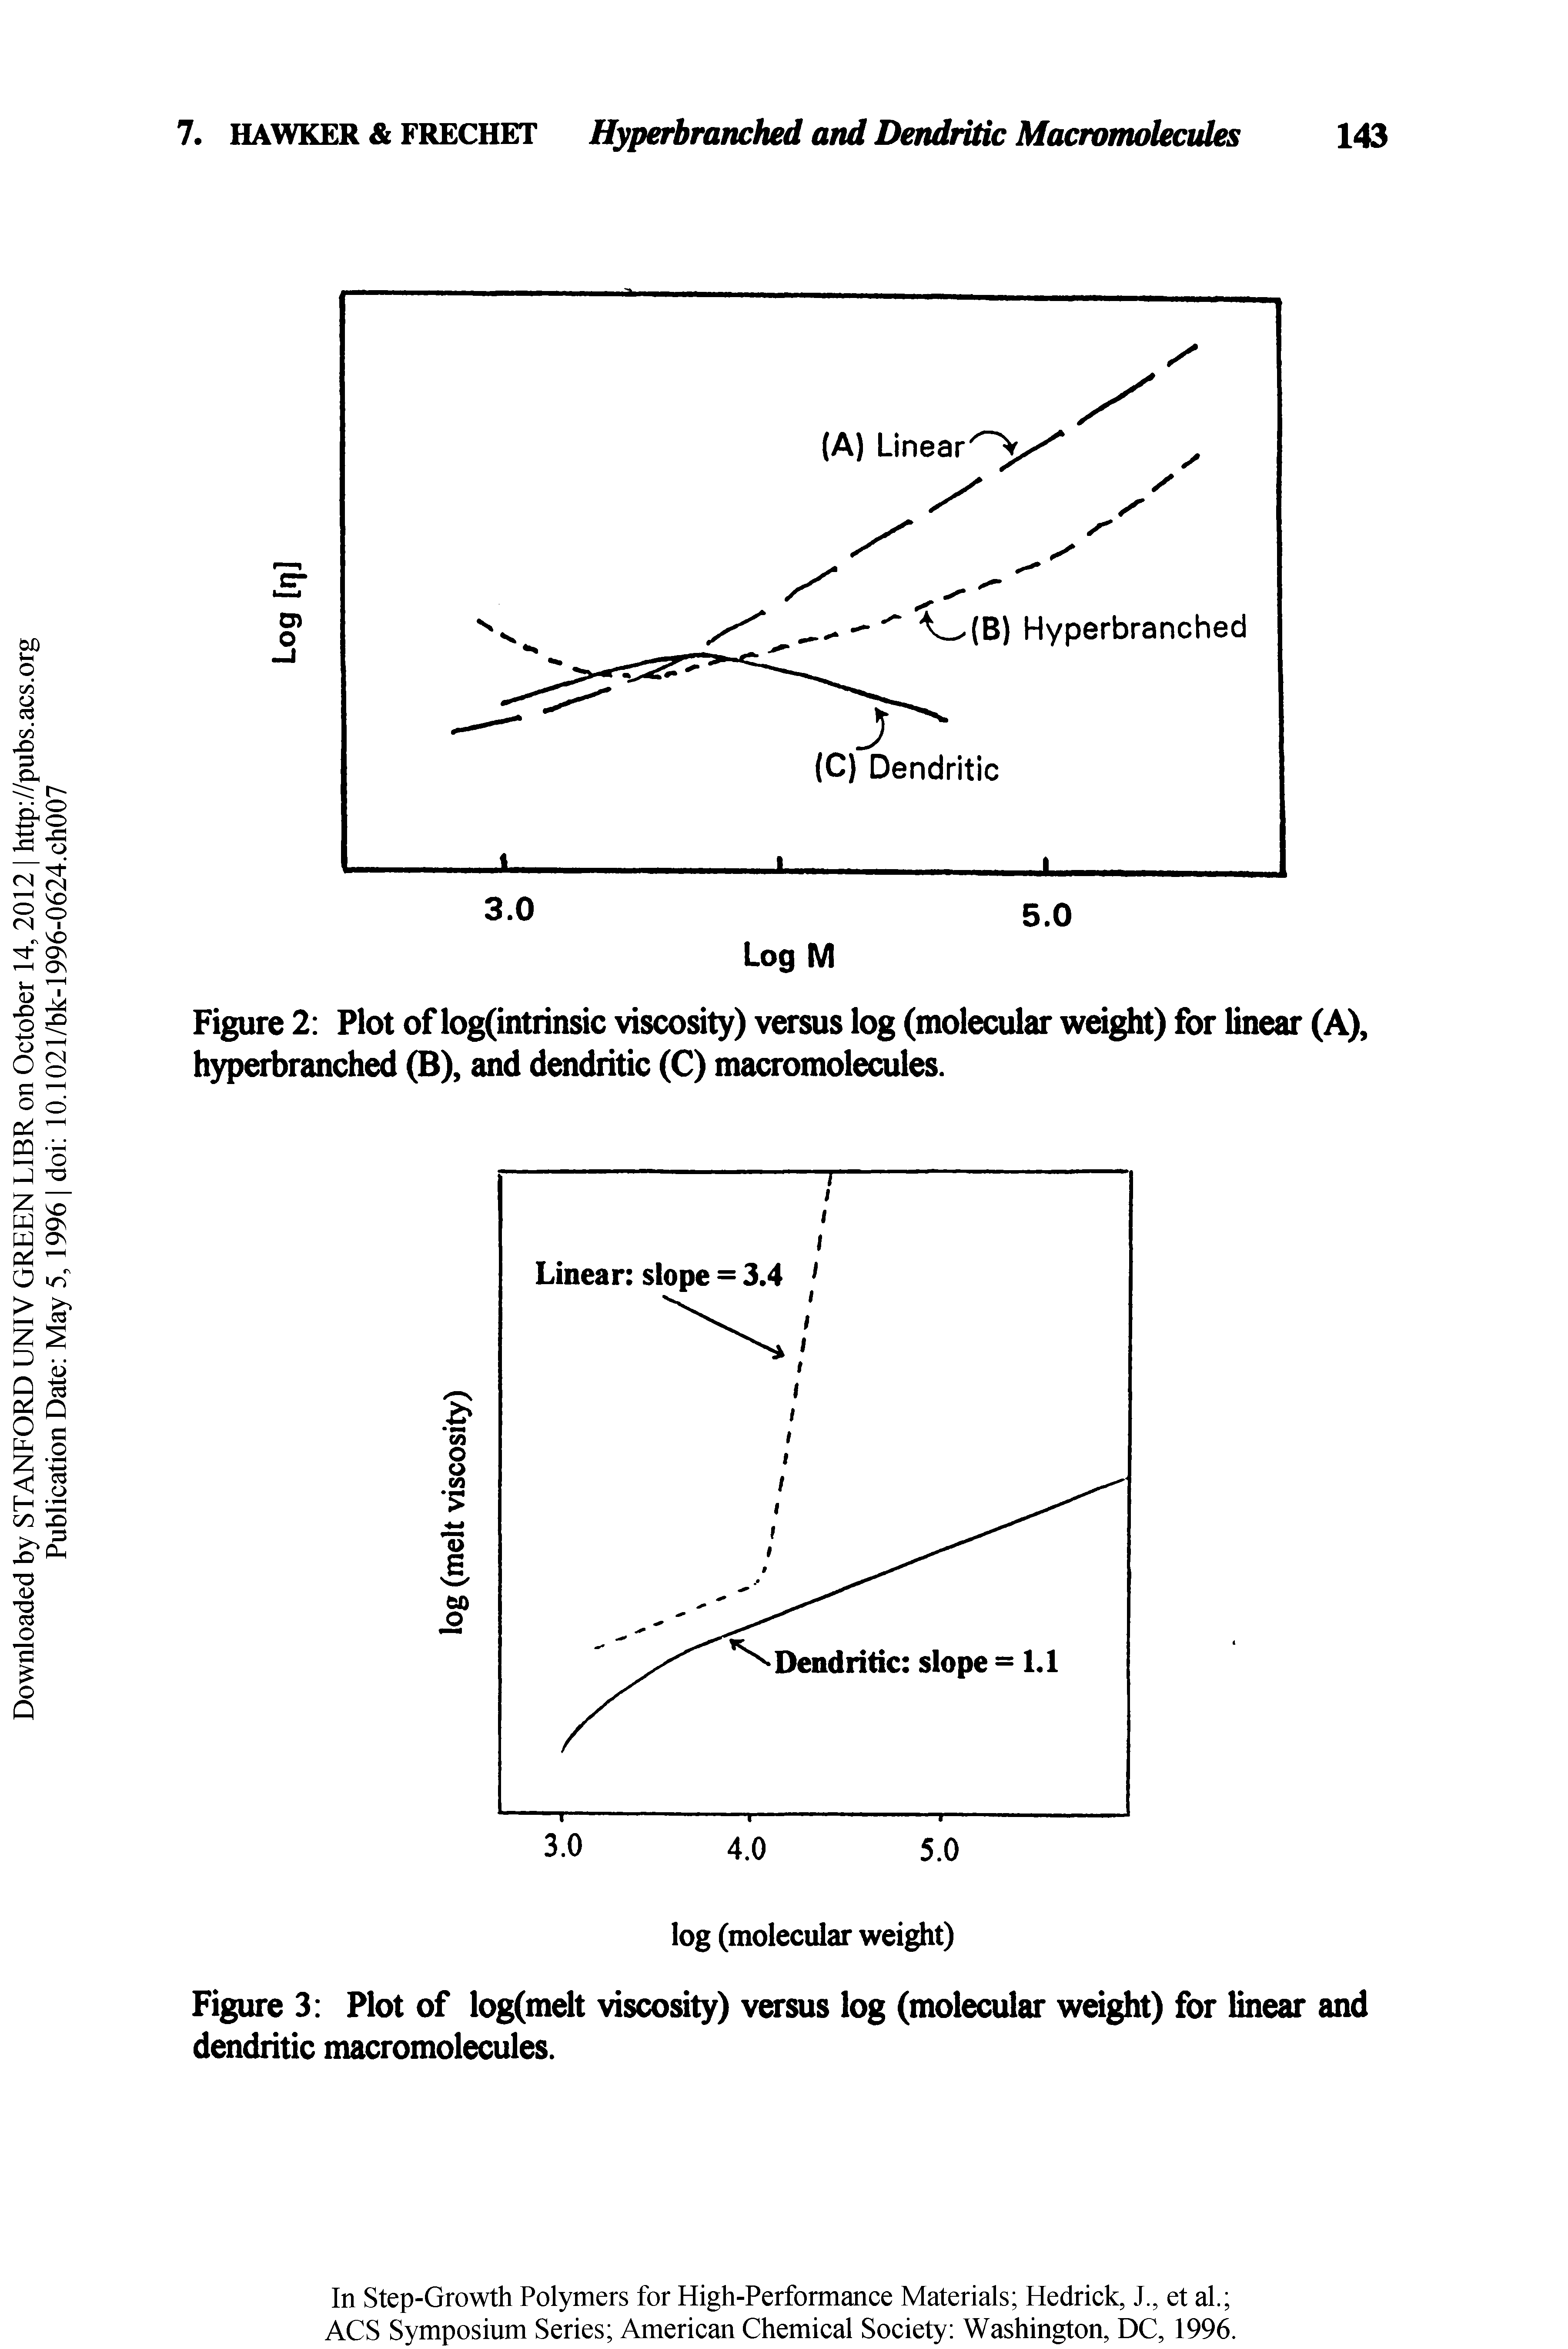 Figure 2 Plot of log(intrinsic viscosity) versus log (molecular wdght) for linear (A), hyperbranched (B), and dendritic (C) macromolecules.